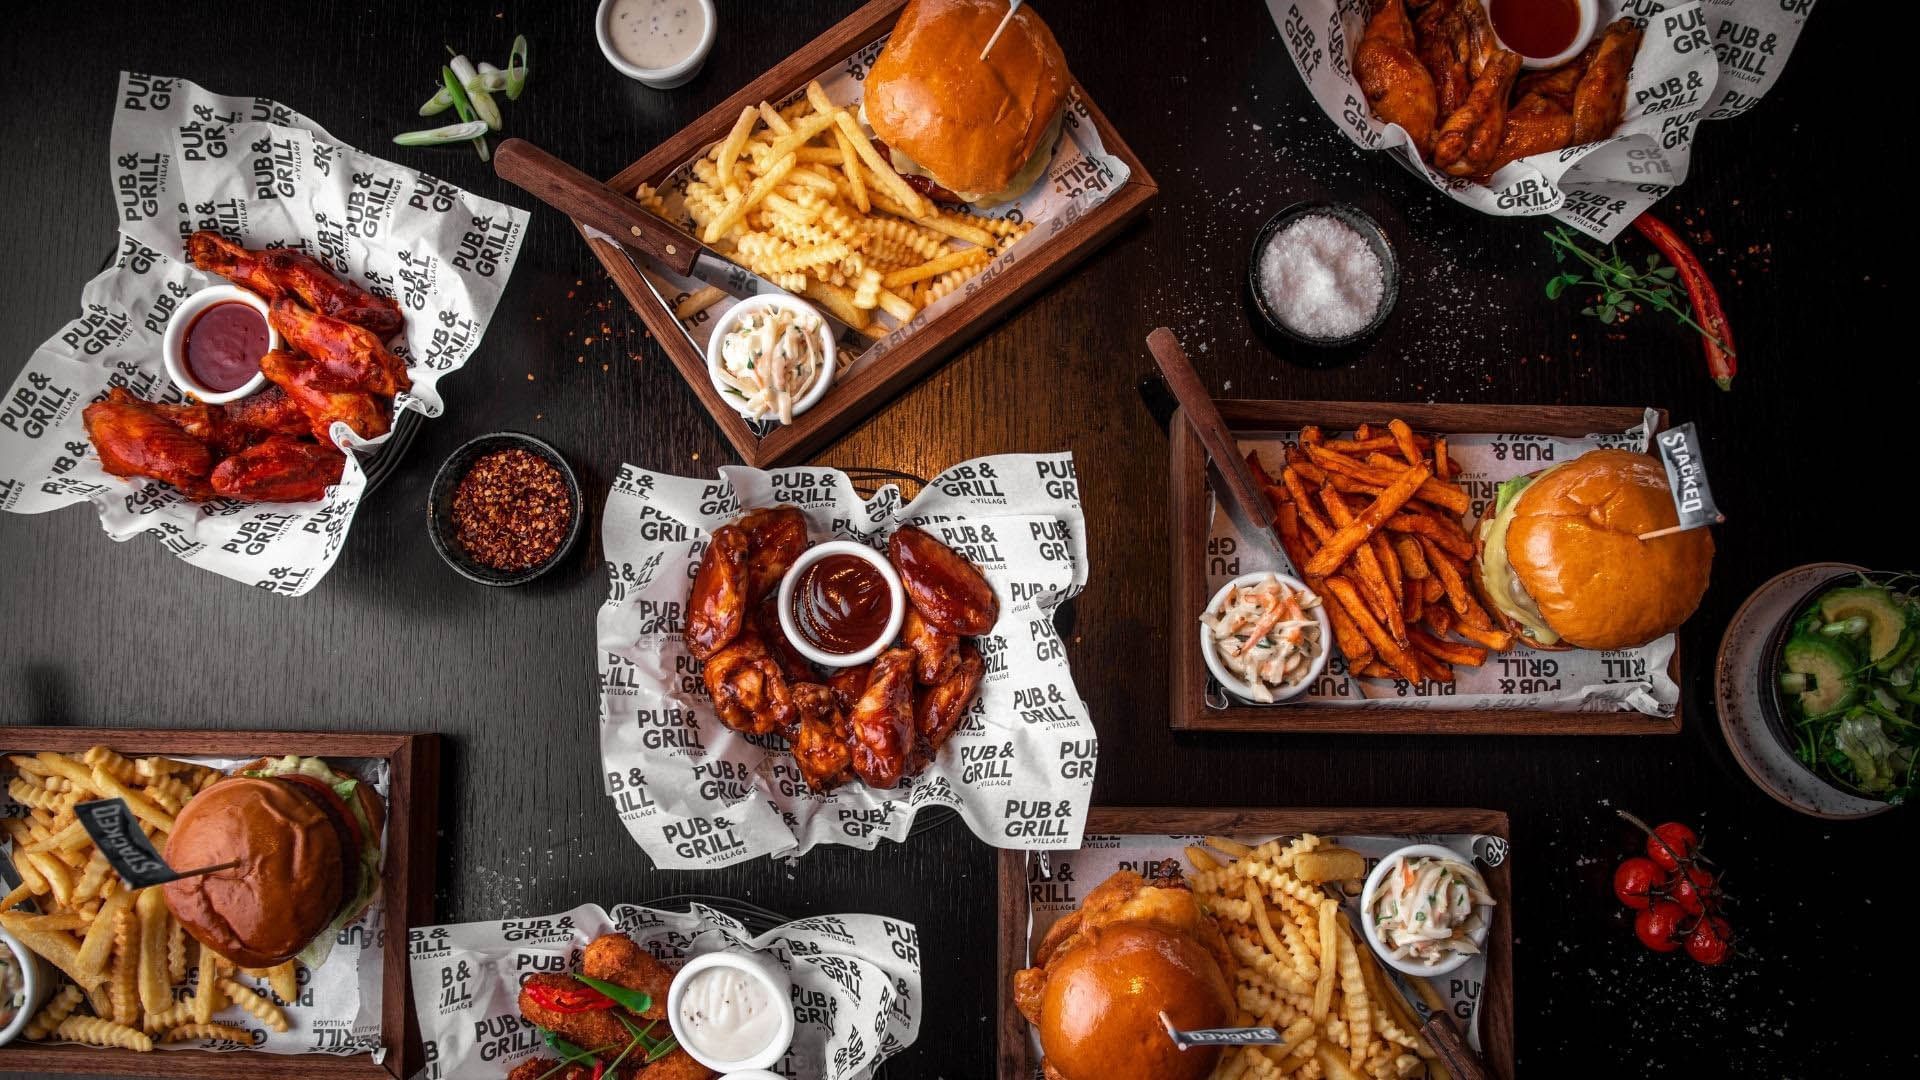 Eat & Drink | Hotels With Pub & Grill | Starbucks